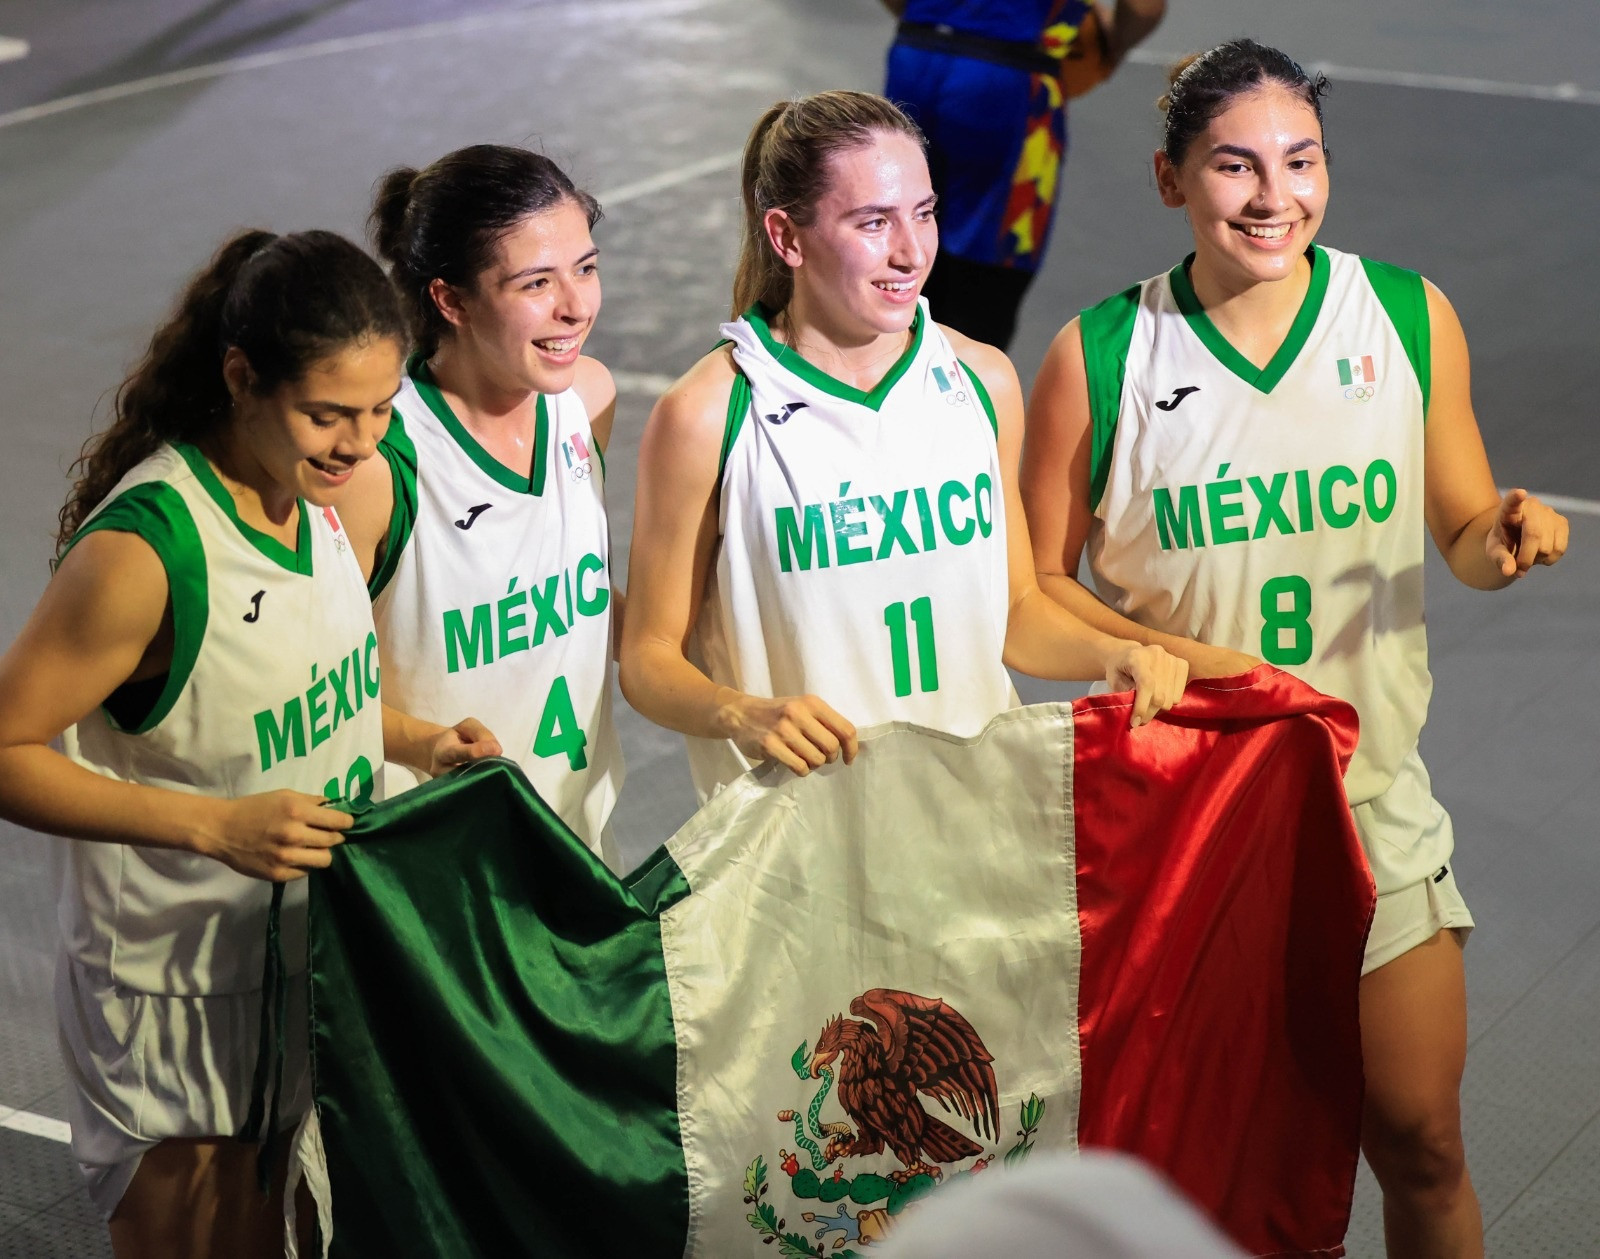 Mexico beat Puerto Rico in a thrilling women's 3x3 basketball final to claim gold ©San Salvador 2023